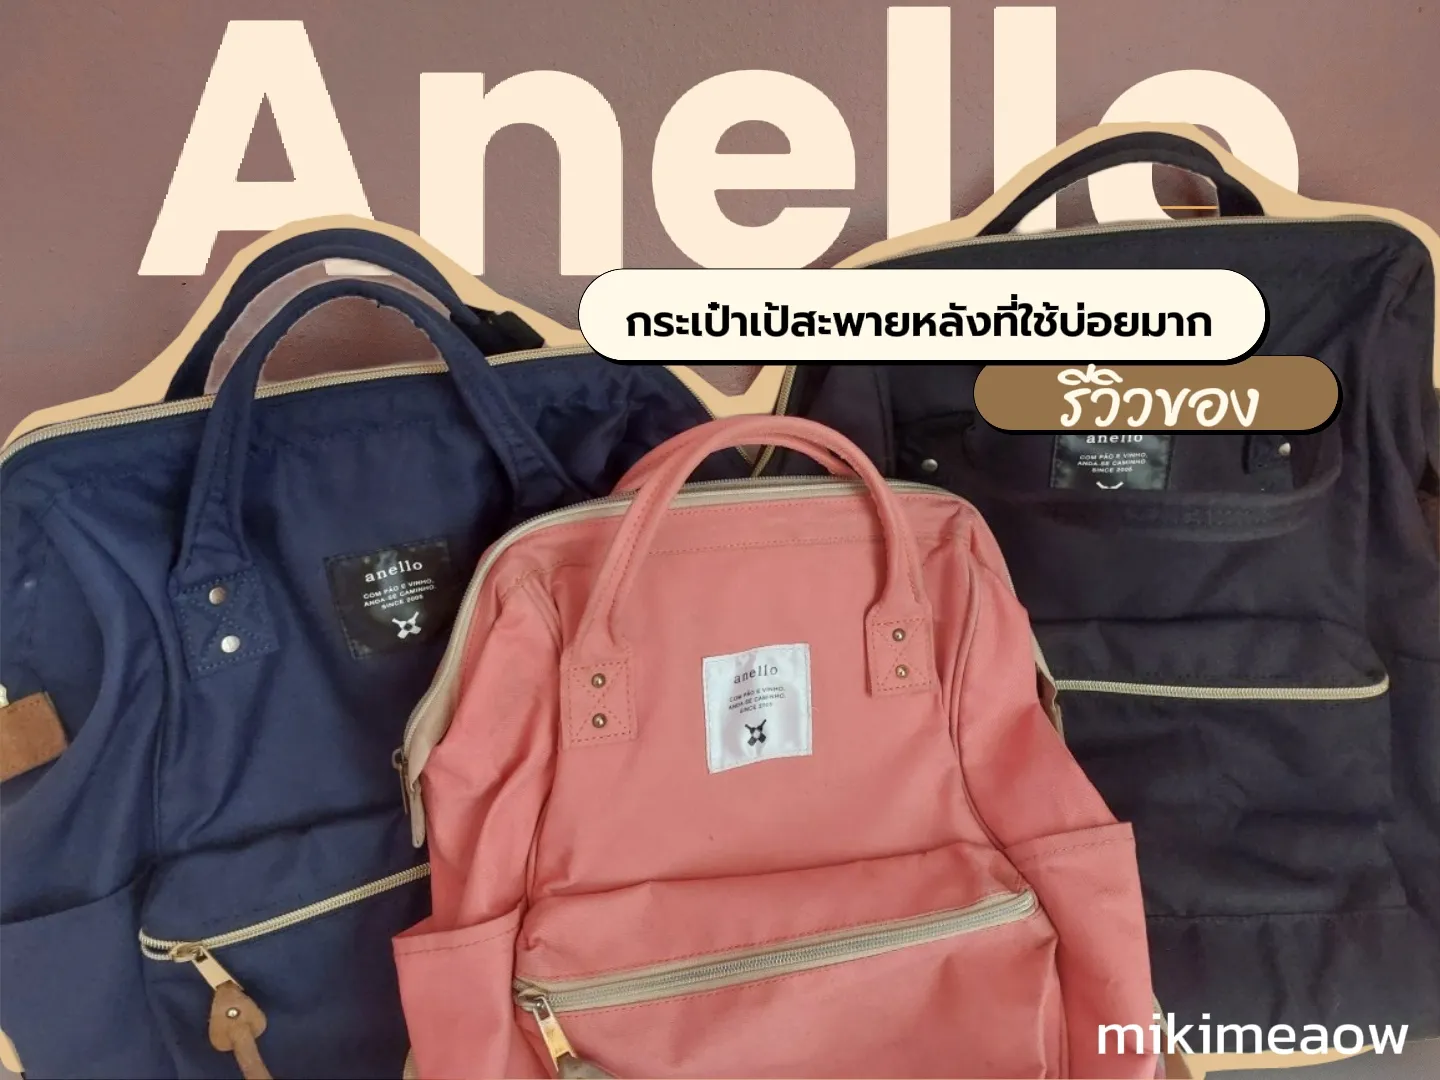 unboxing and review of anello backpack 